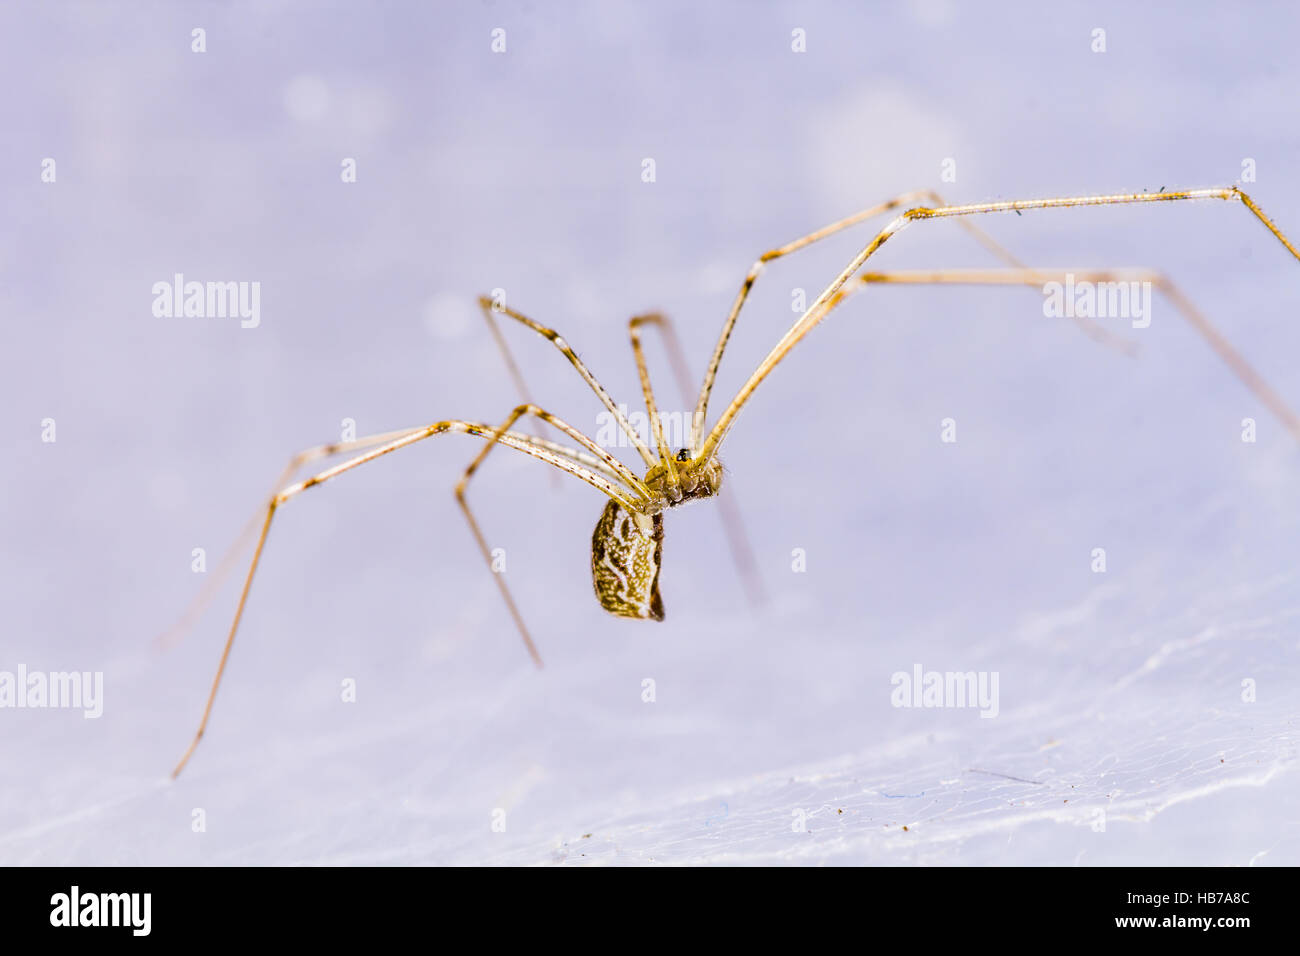 Keller Spinne High Resolution Stock Photography and Images - Alamy